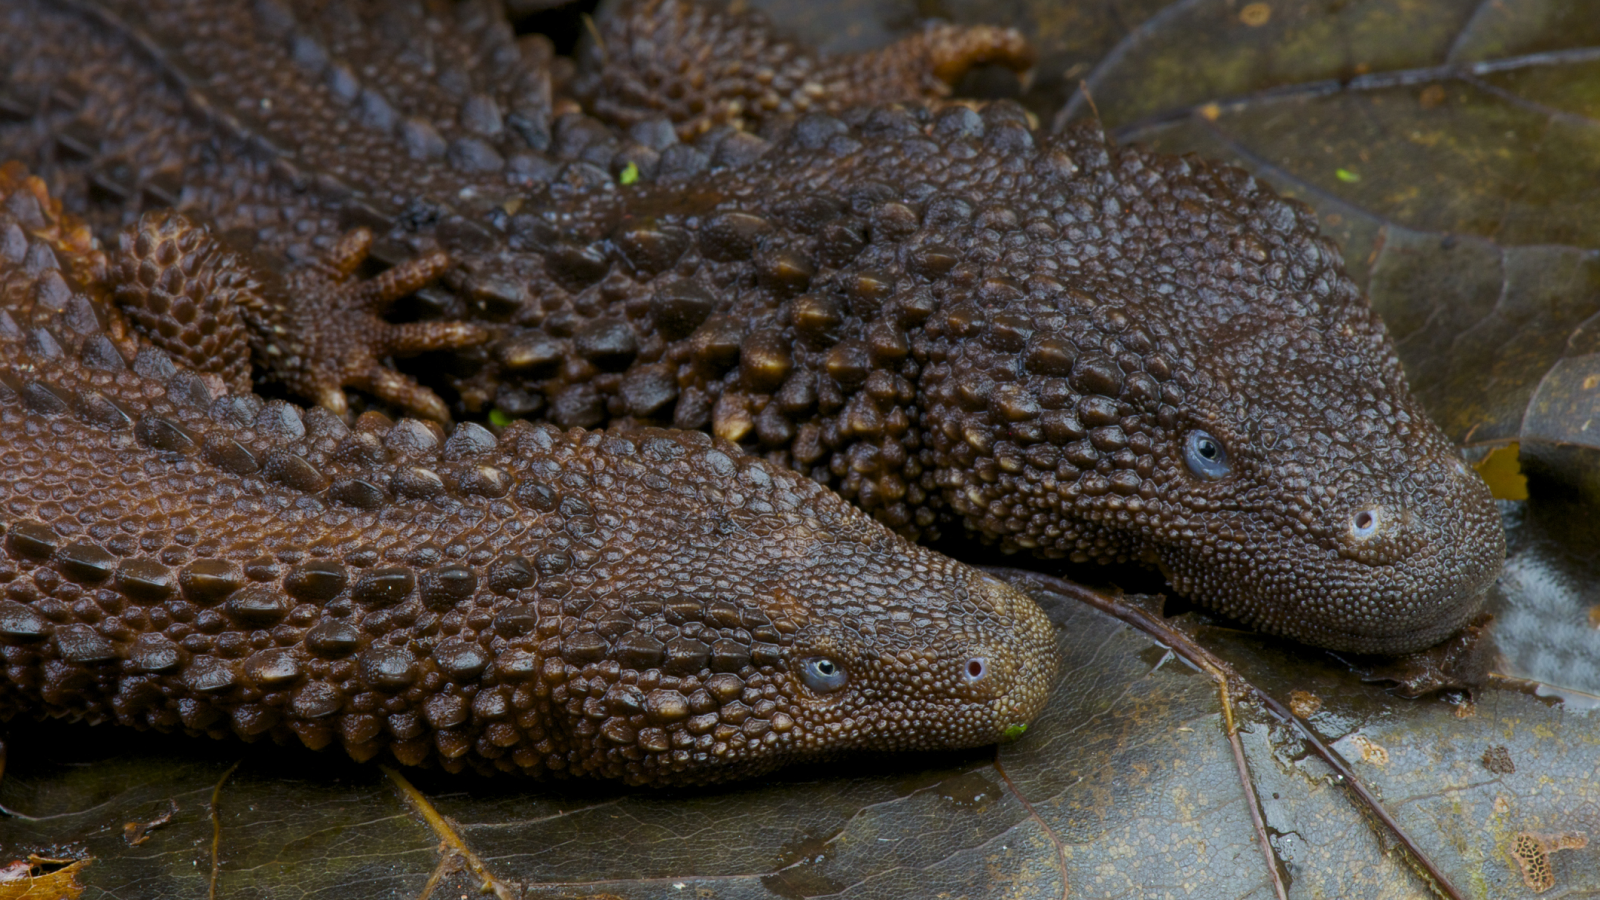 Earless monitor lizards: The 'Holy Grail' of reptiles that looks like a mini dragon